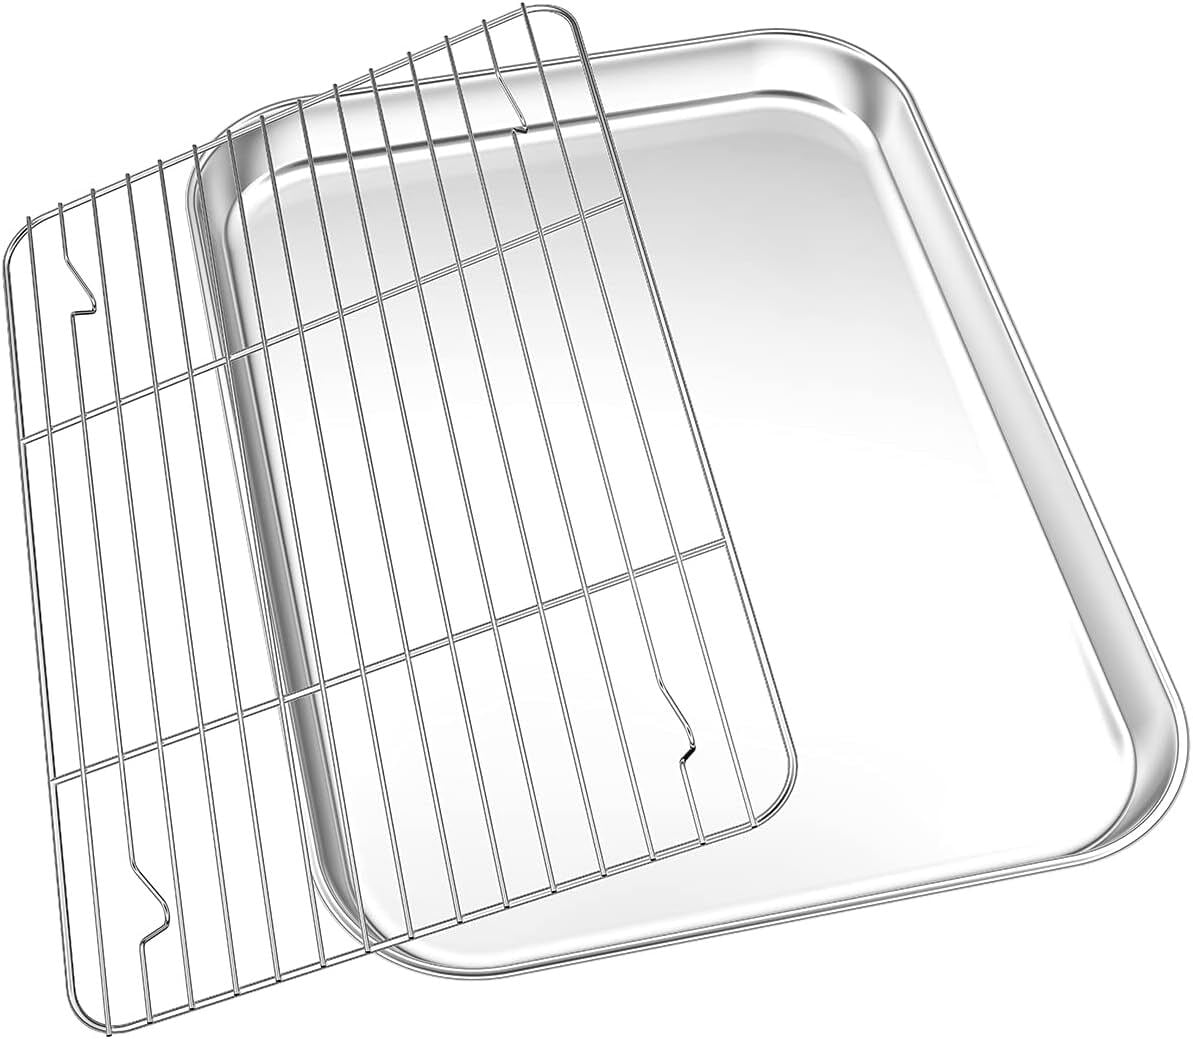 Roofei Baking Sheet with Cooling Rack Set [1 Sheets + 1 Racks], 18 Inch  Stainless Steel Baking Pans Tray Cookie Sheet with Wire Rack for Oven, Non  Toxic, Heavy Duty & Dishwasher